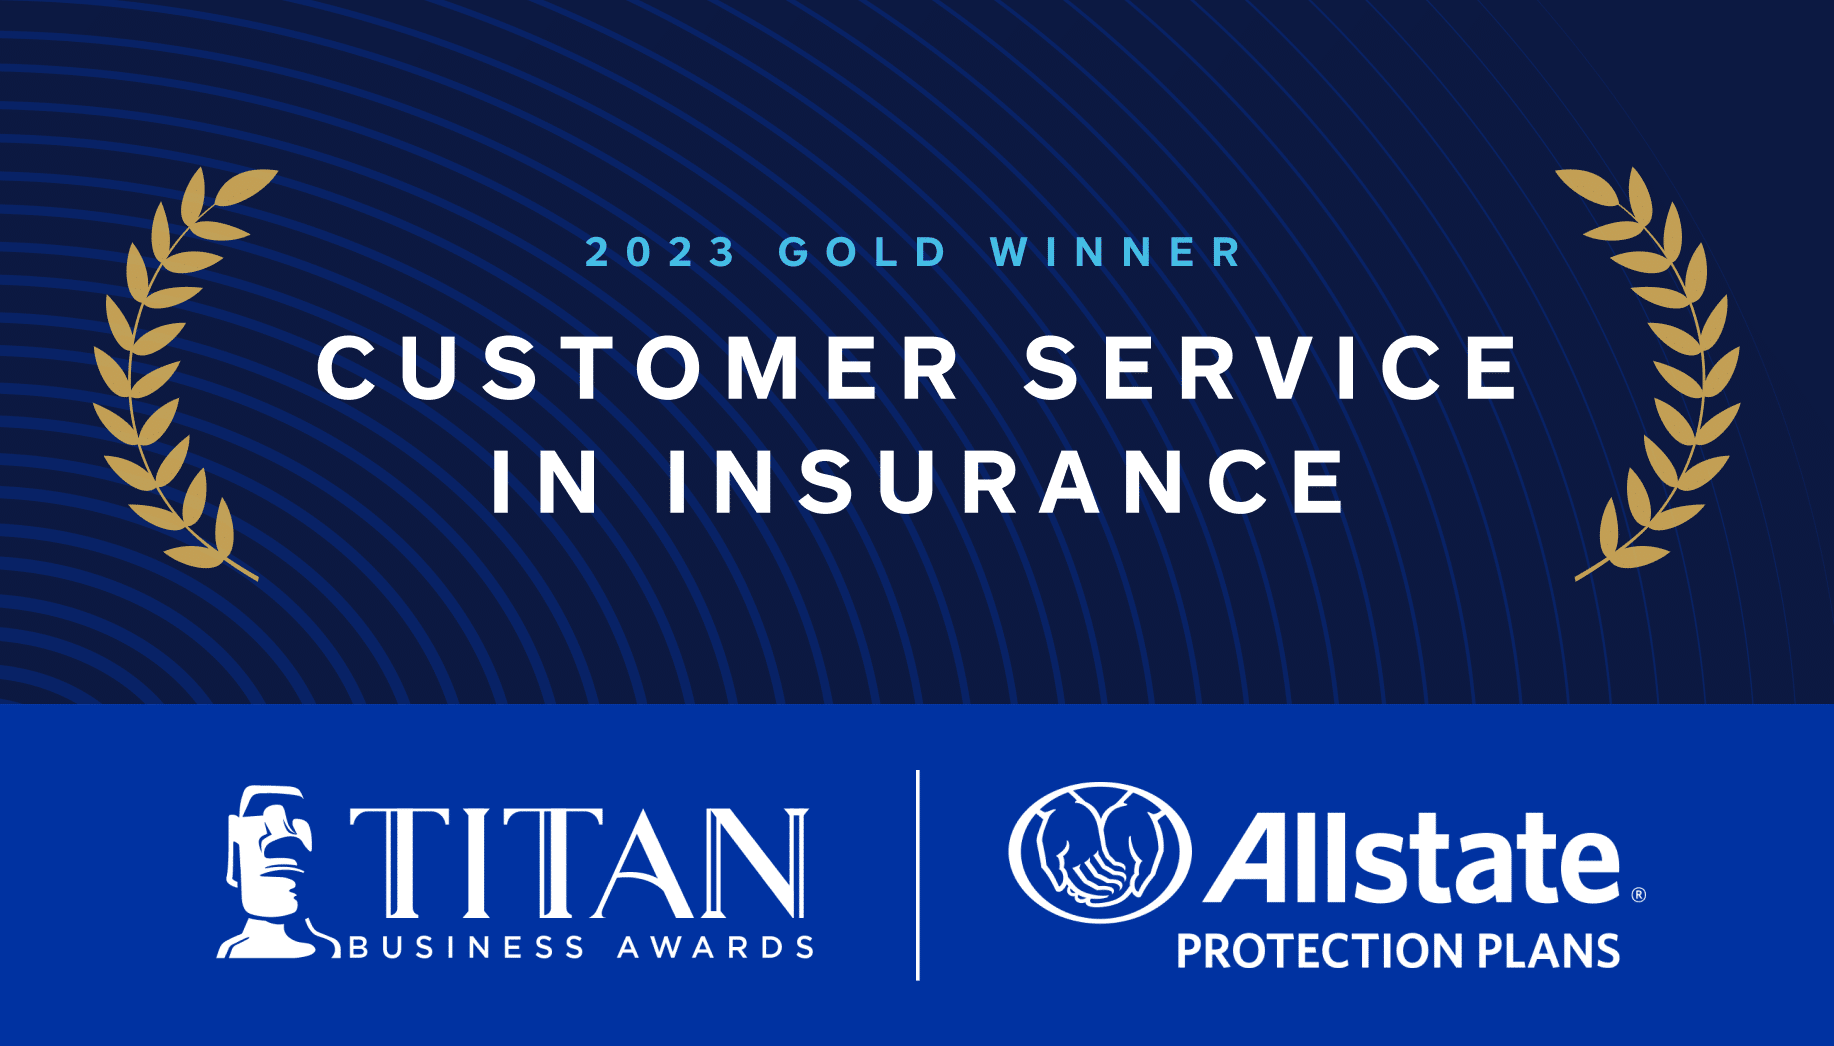 Allstate Protection Plans Wins 2023 Gold Award for Customer Service in Insurance